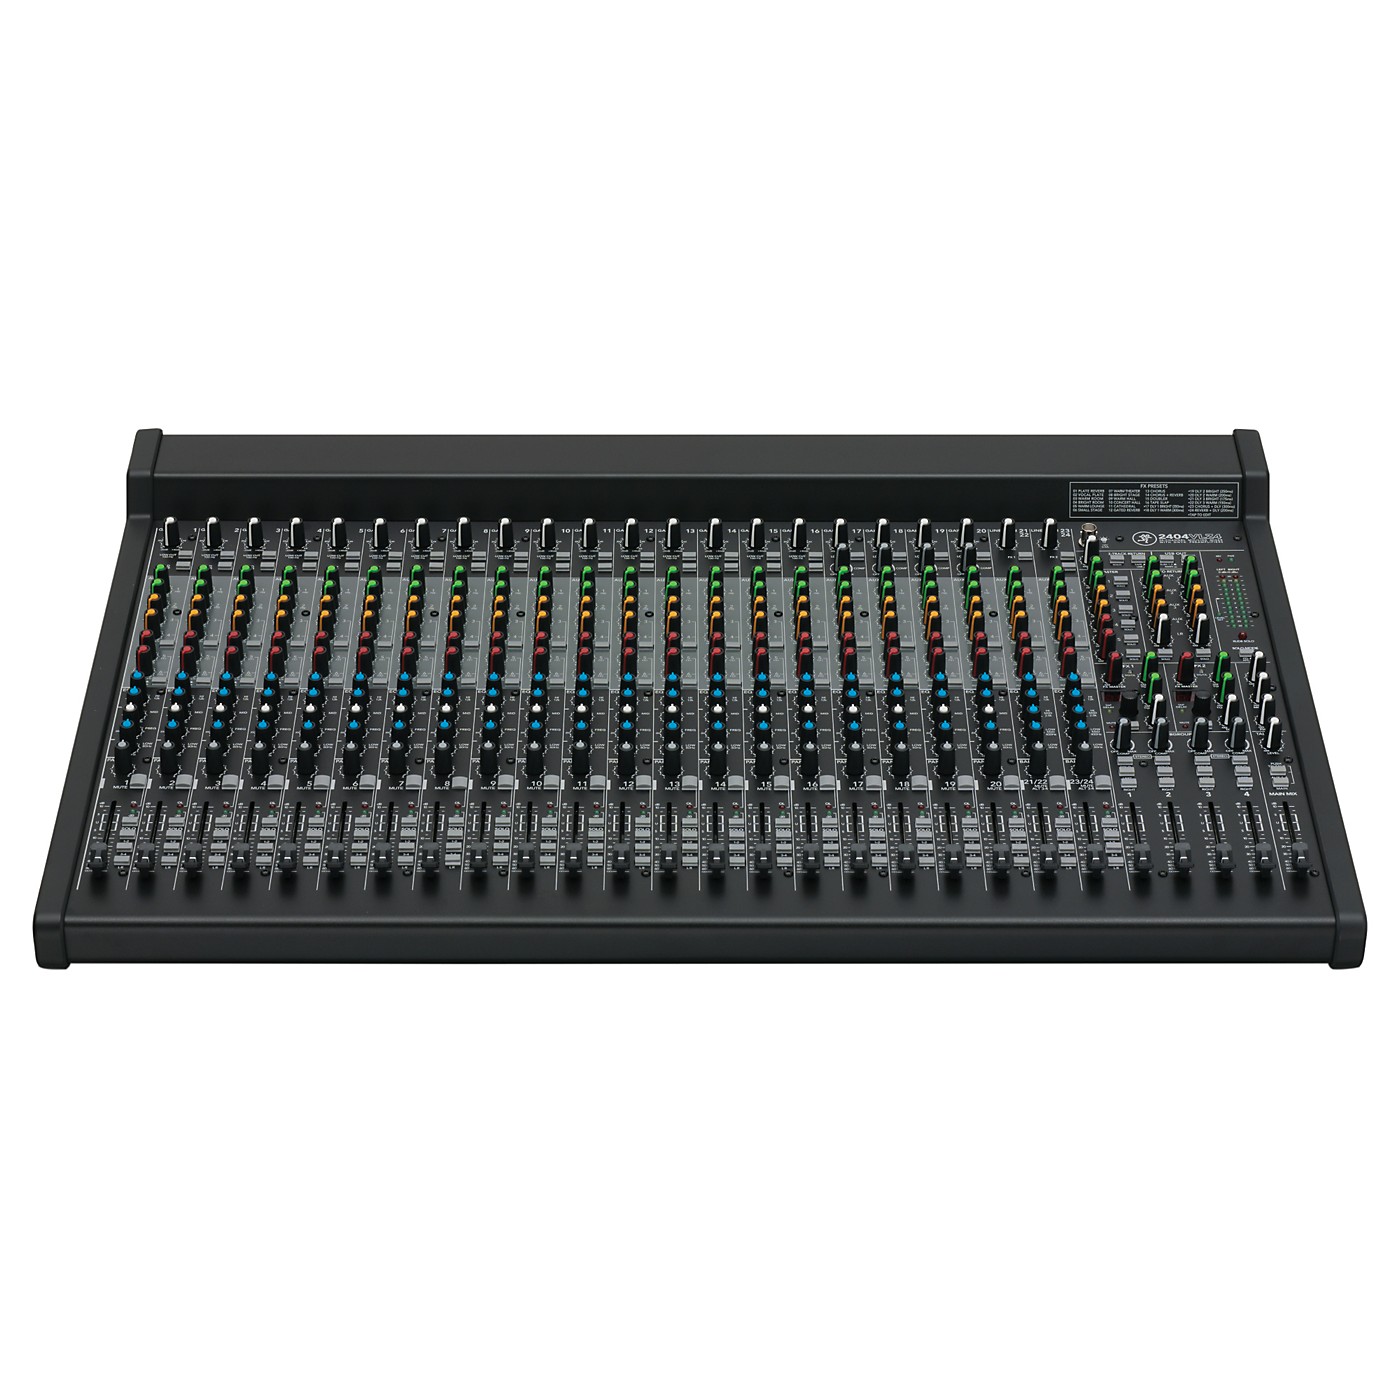 Mackie VLZ4 Series 2404VLZ4 24-Channel/4-Bus FX Mixer with USB thumbnail